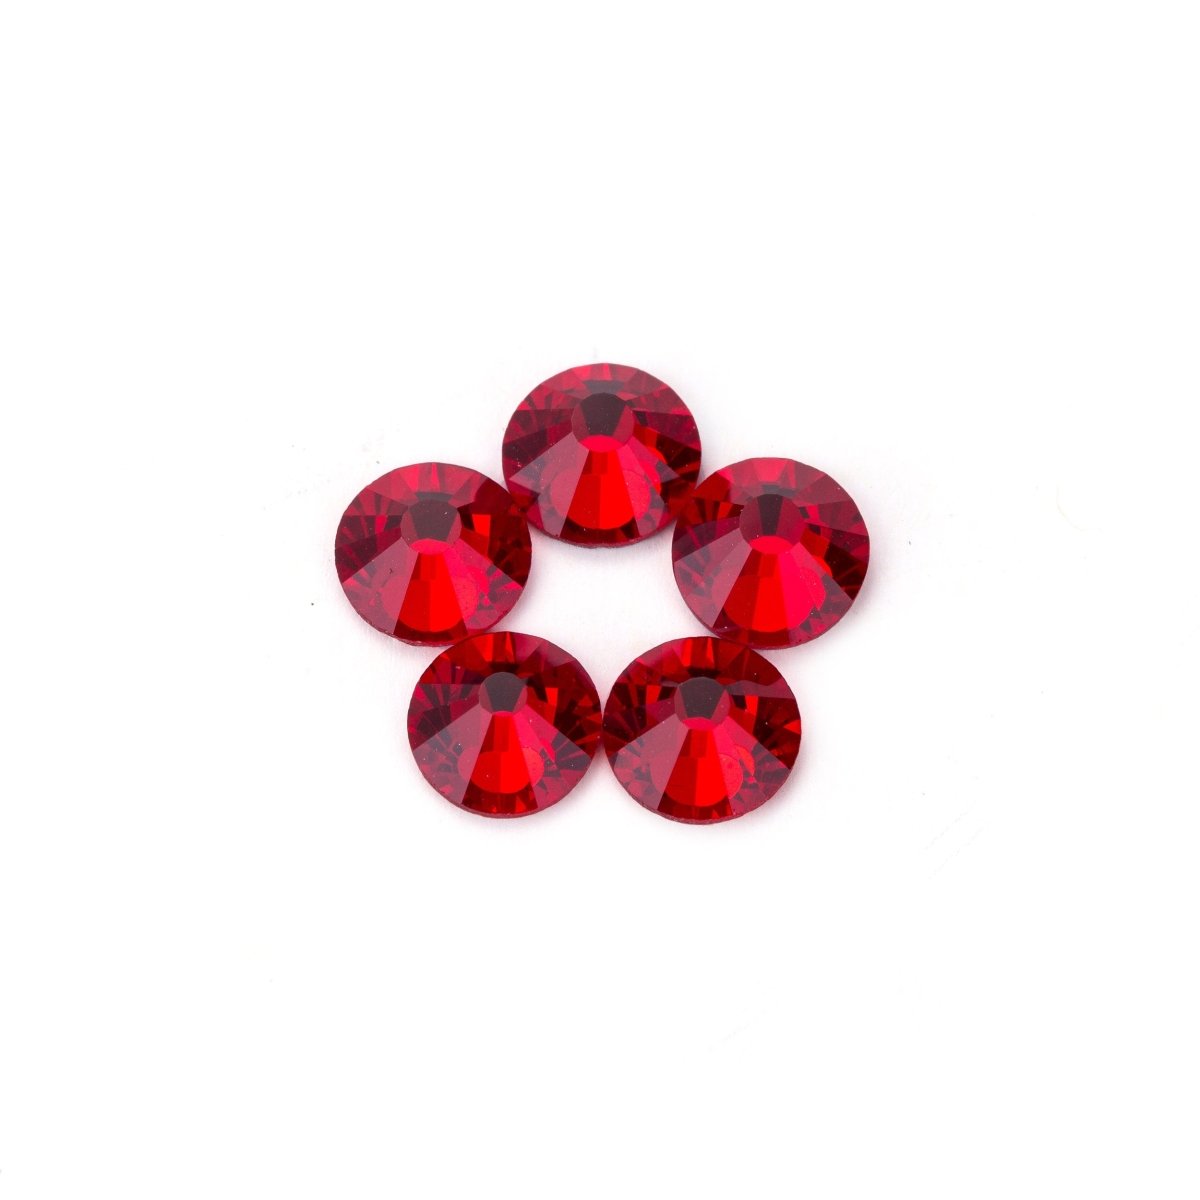 288 pcs High Quality Crystal Bright Light Red Siam Rhinestones Loose wholesale Crystal flat back No Hot Fix Size glass beads, 288-SS30/34-SIAM - DLUXCA